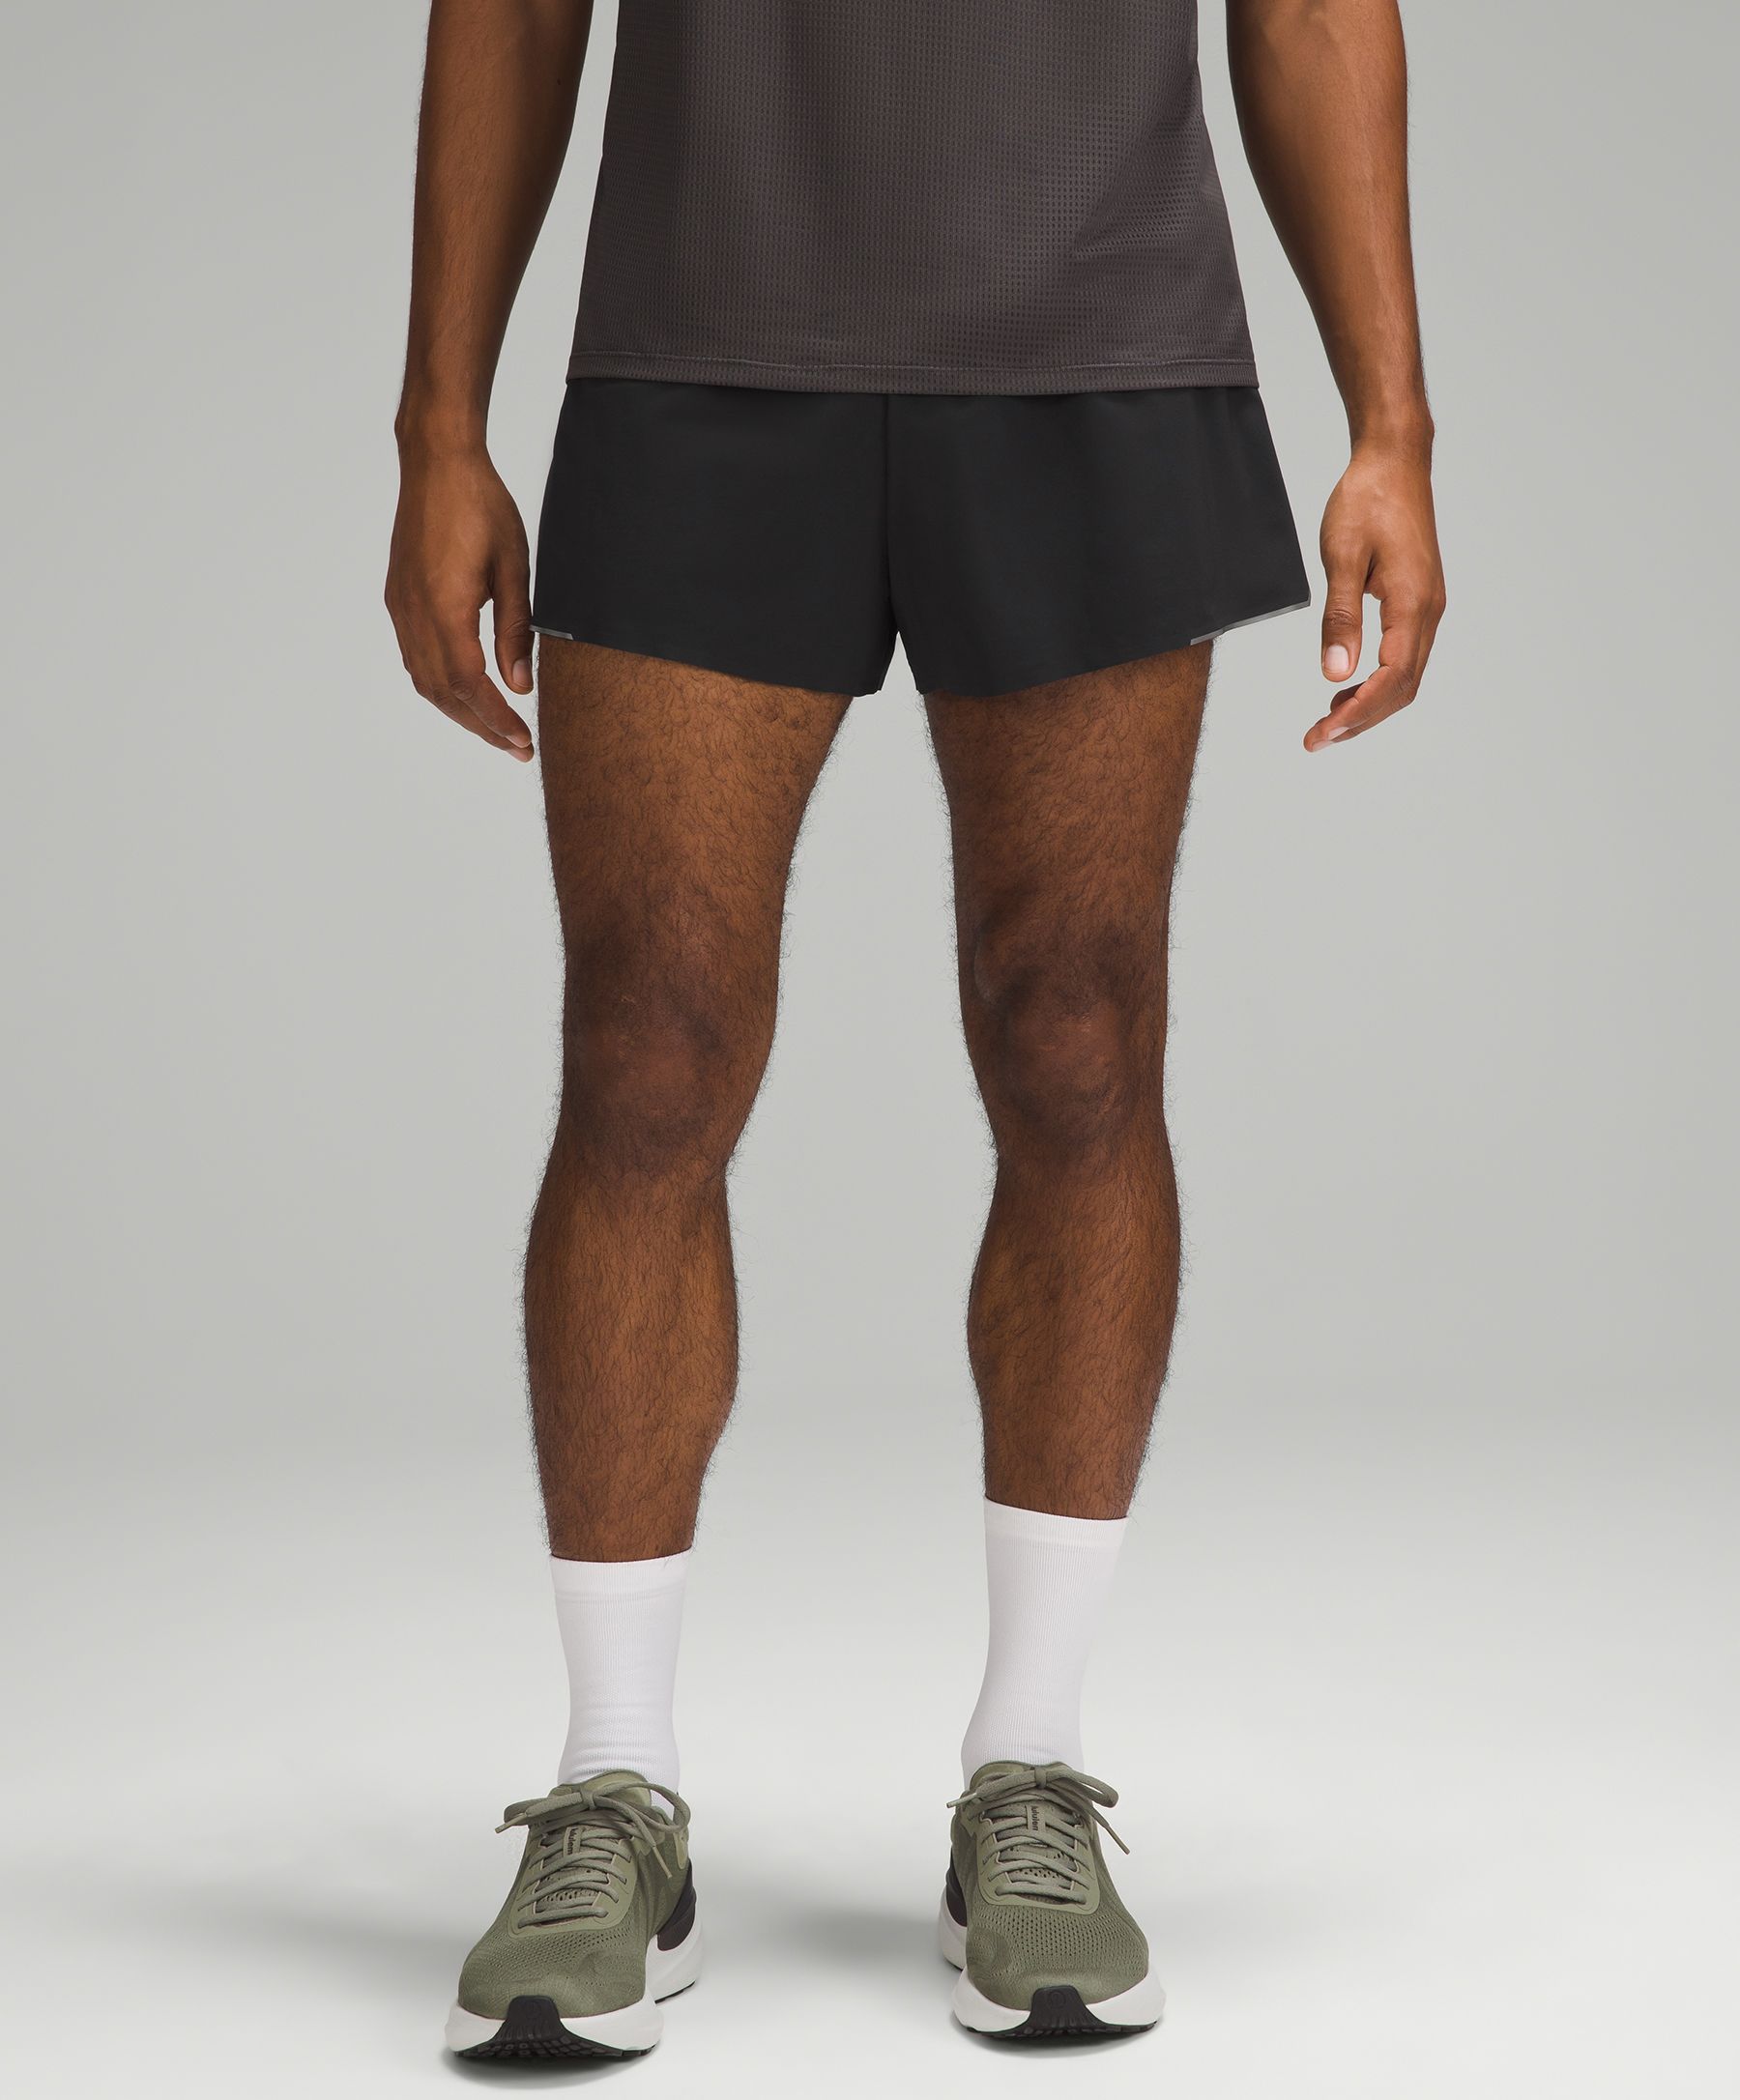 Lululemon Fast and Free Shorts - Sartorial Meanderings